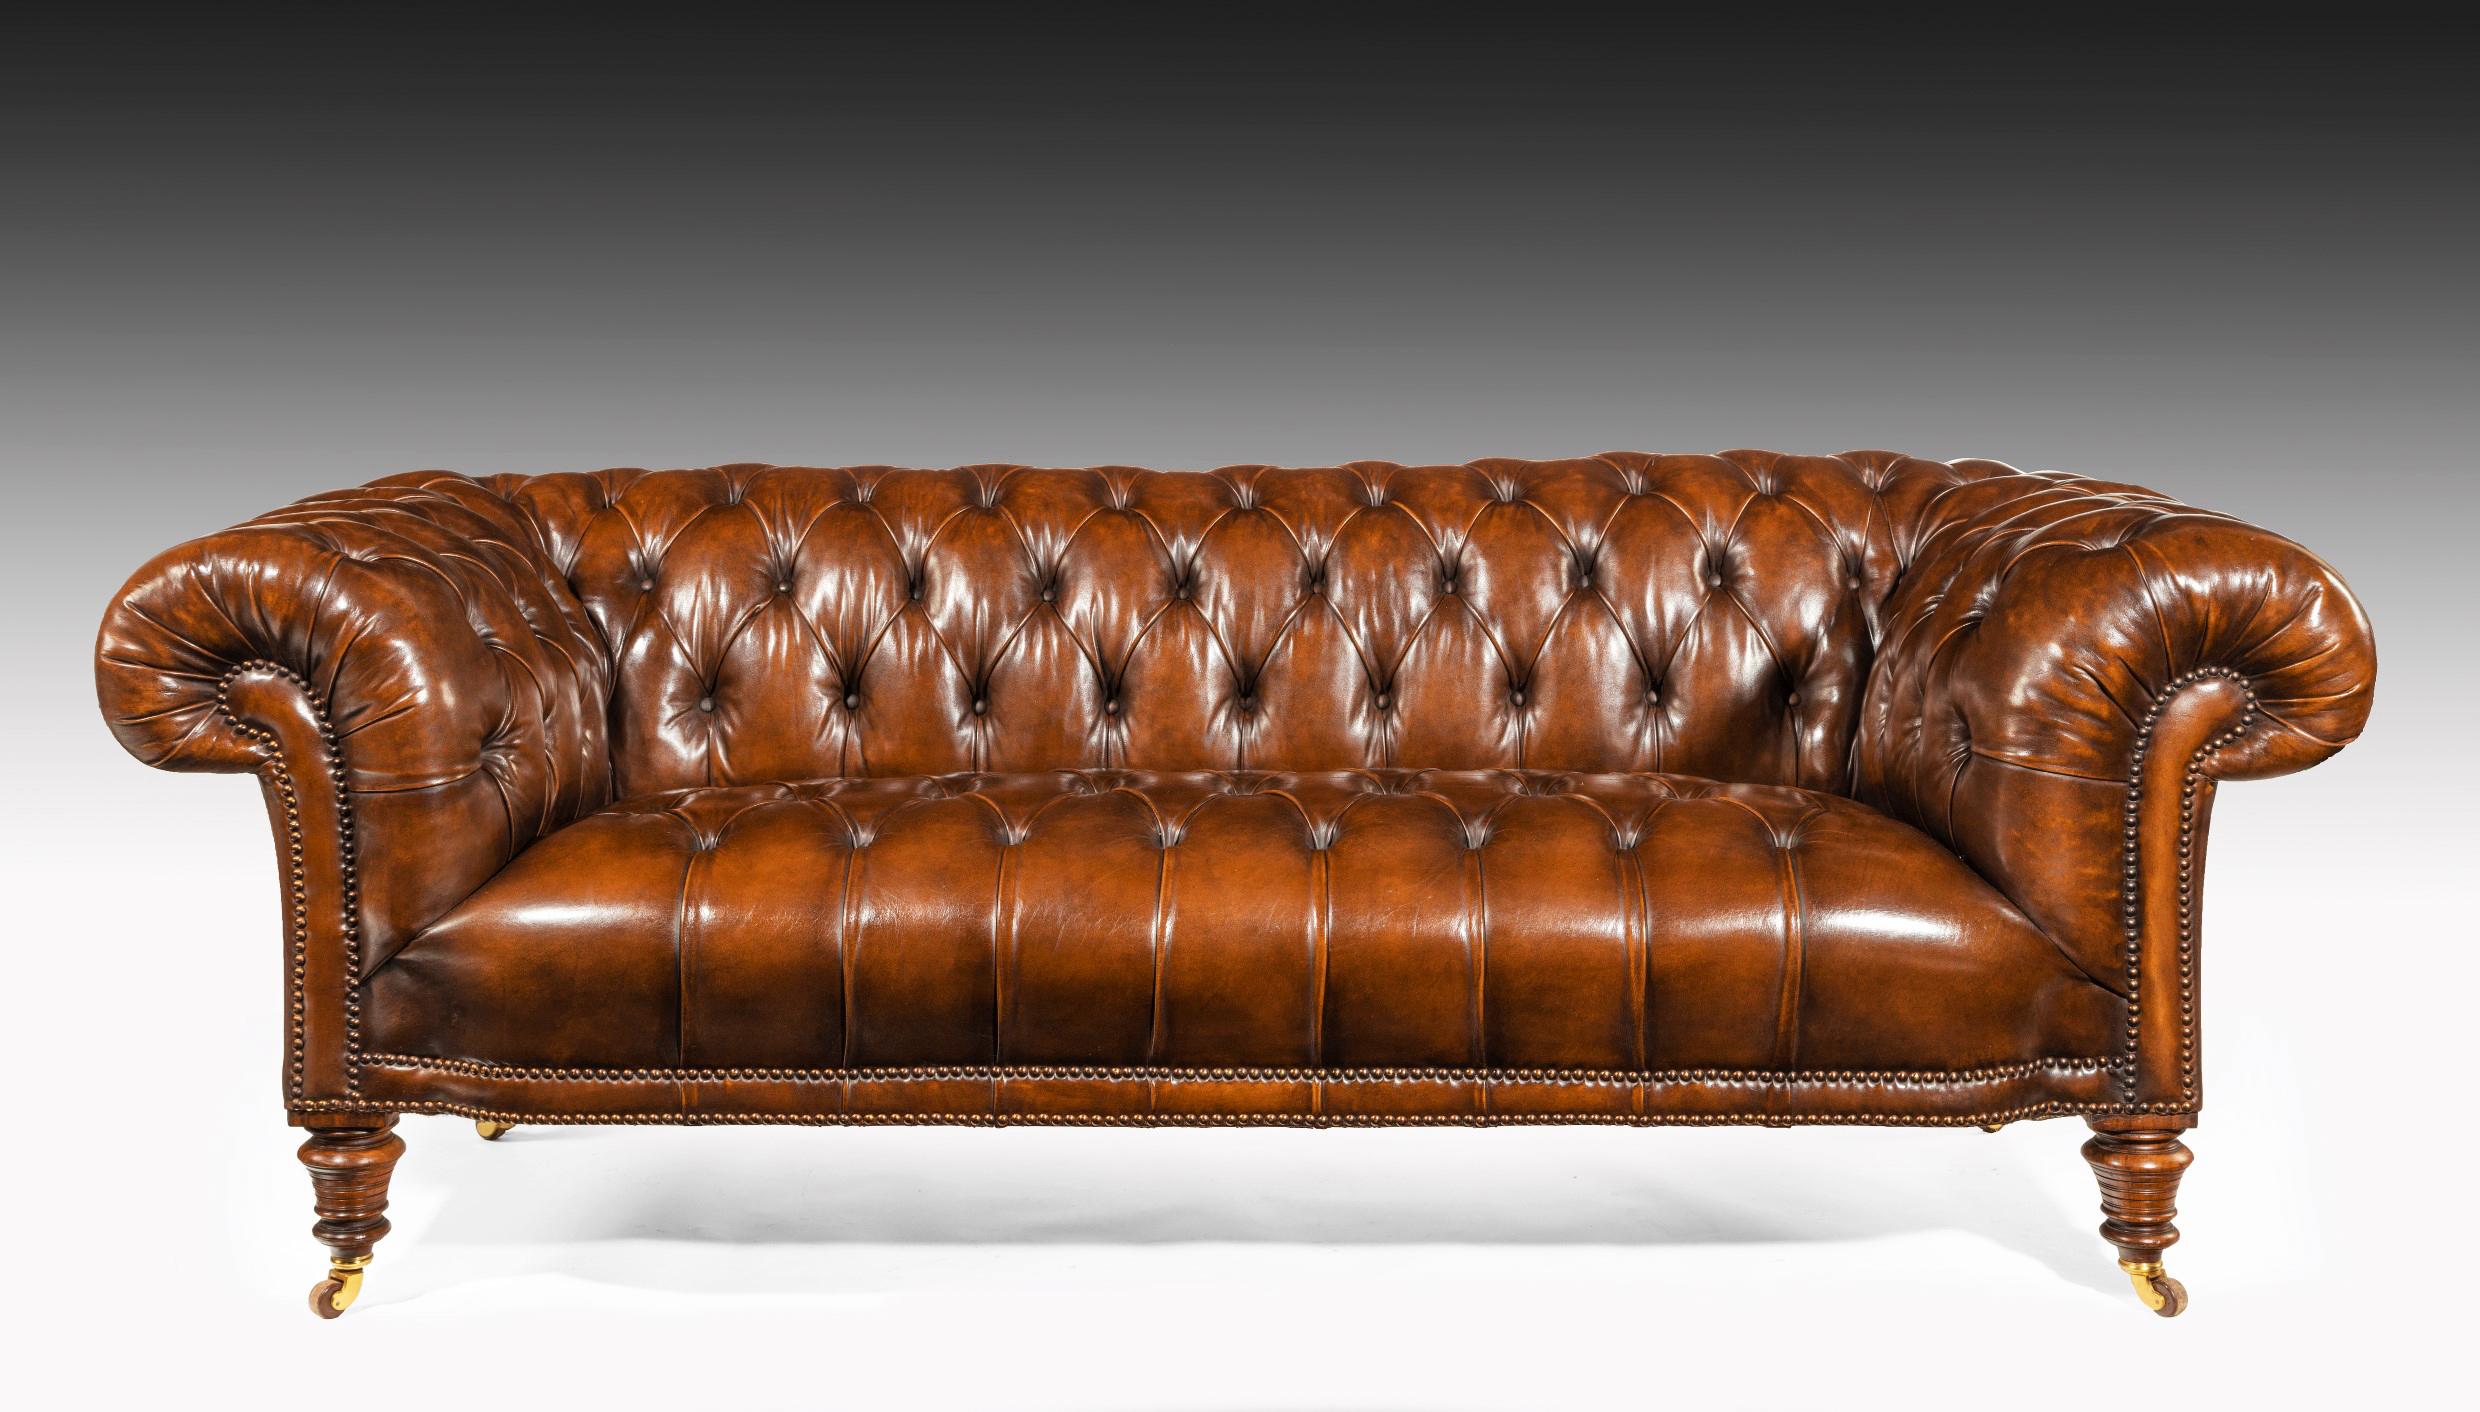 19th Century Gillows Figured Walnut Leather Chesterfield Sofa 2